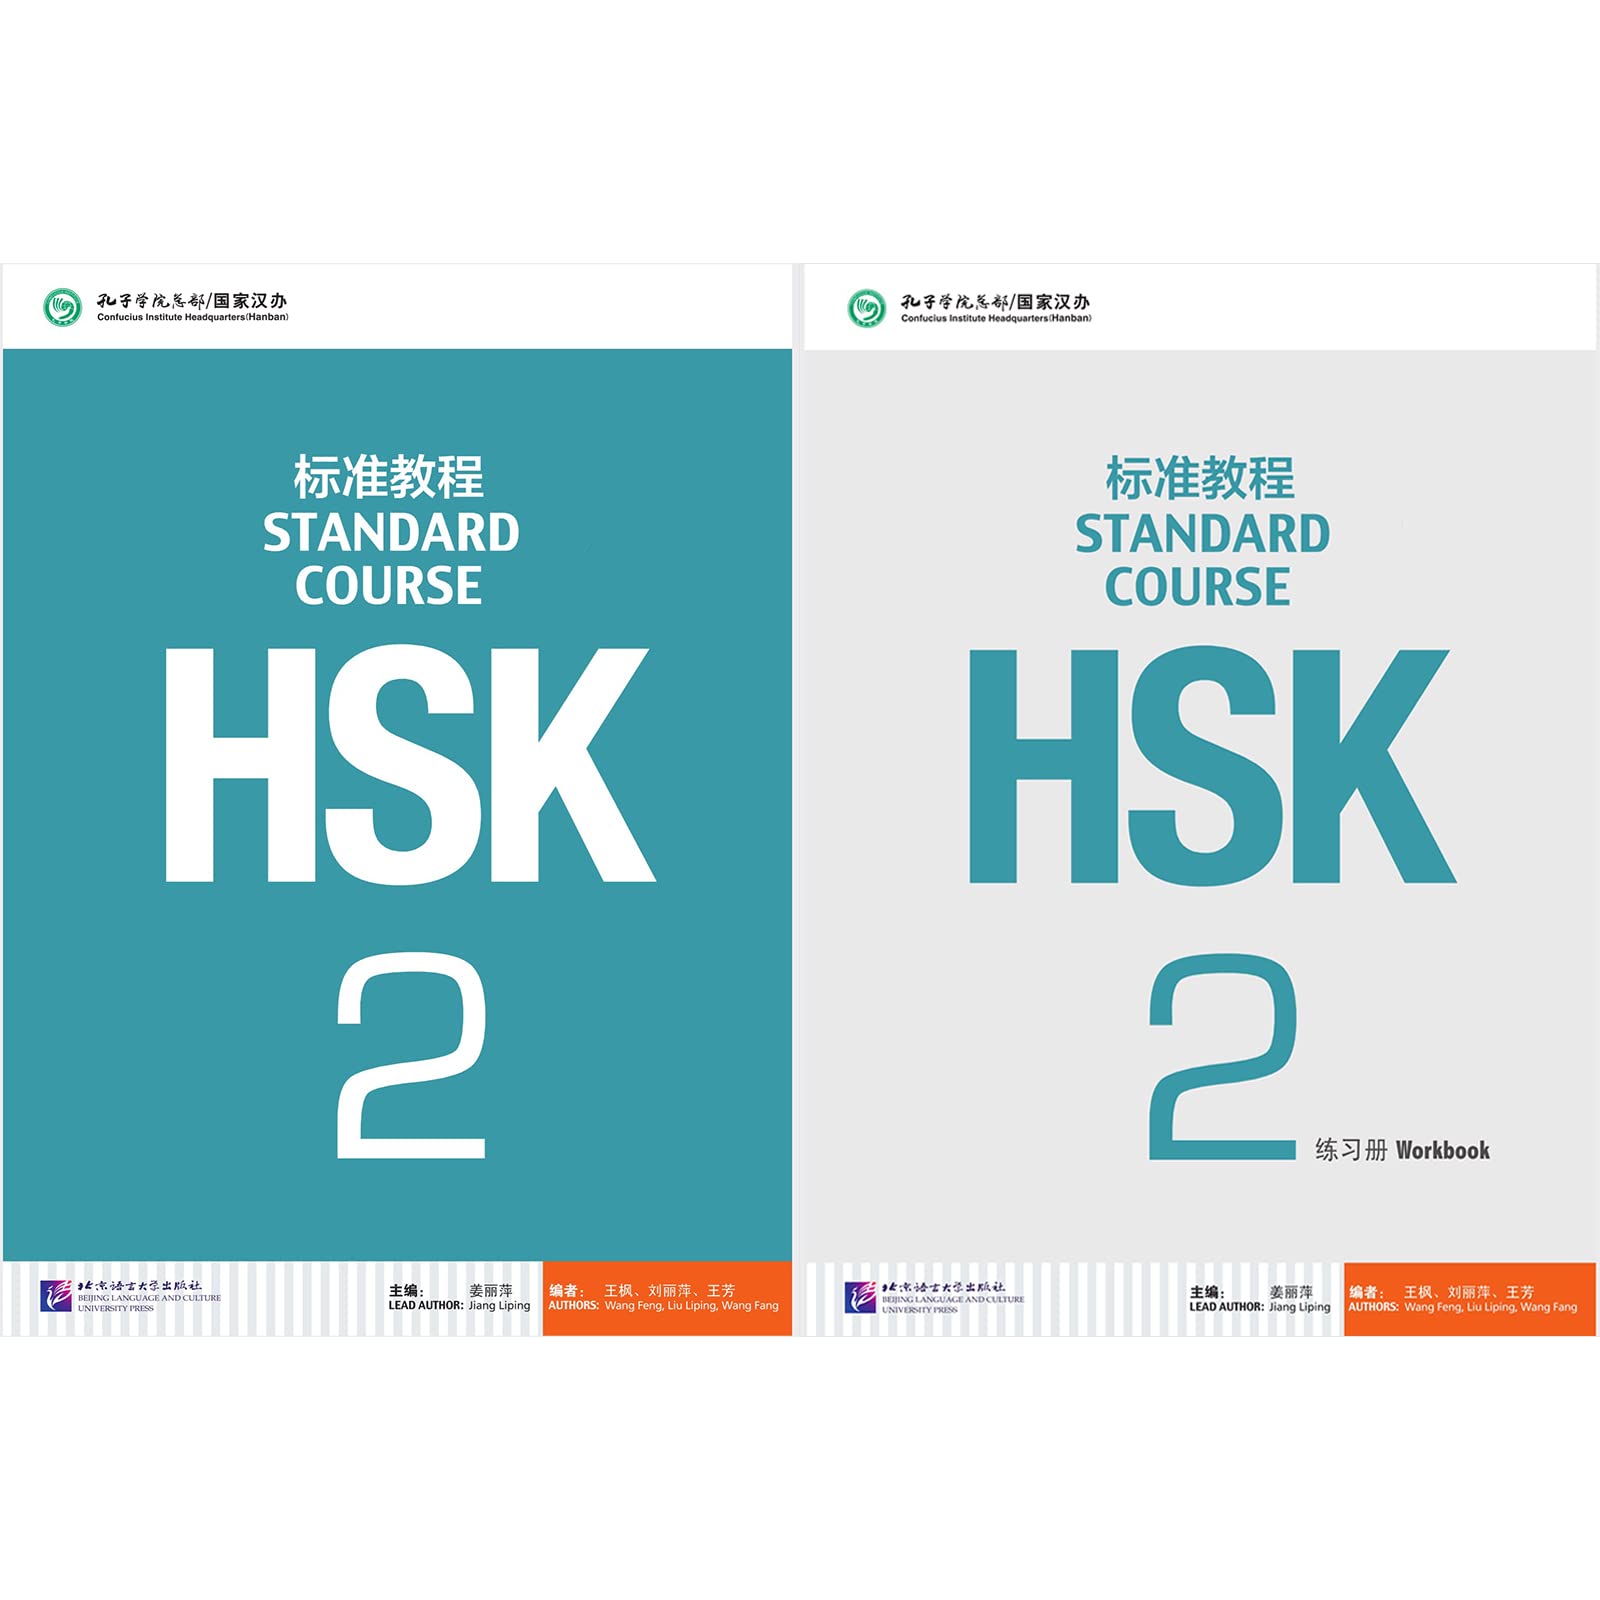 HSK Standard Course 2 SET - Textbook +Workbook (Chinese and English Edition)